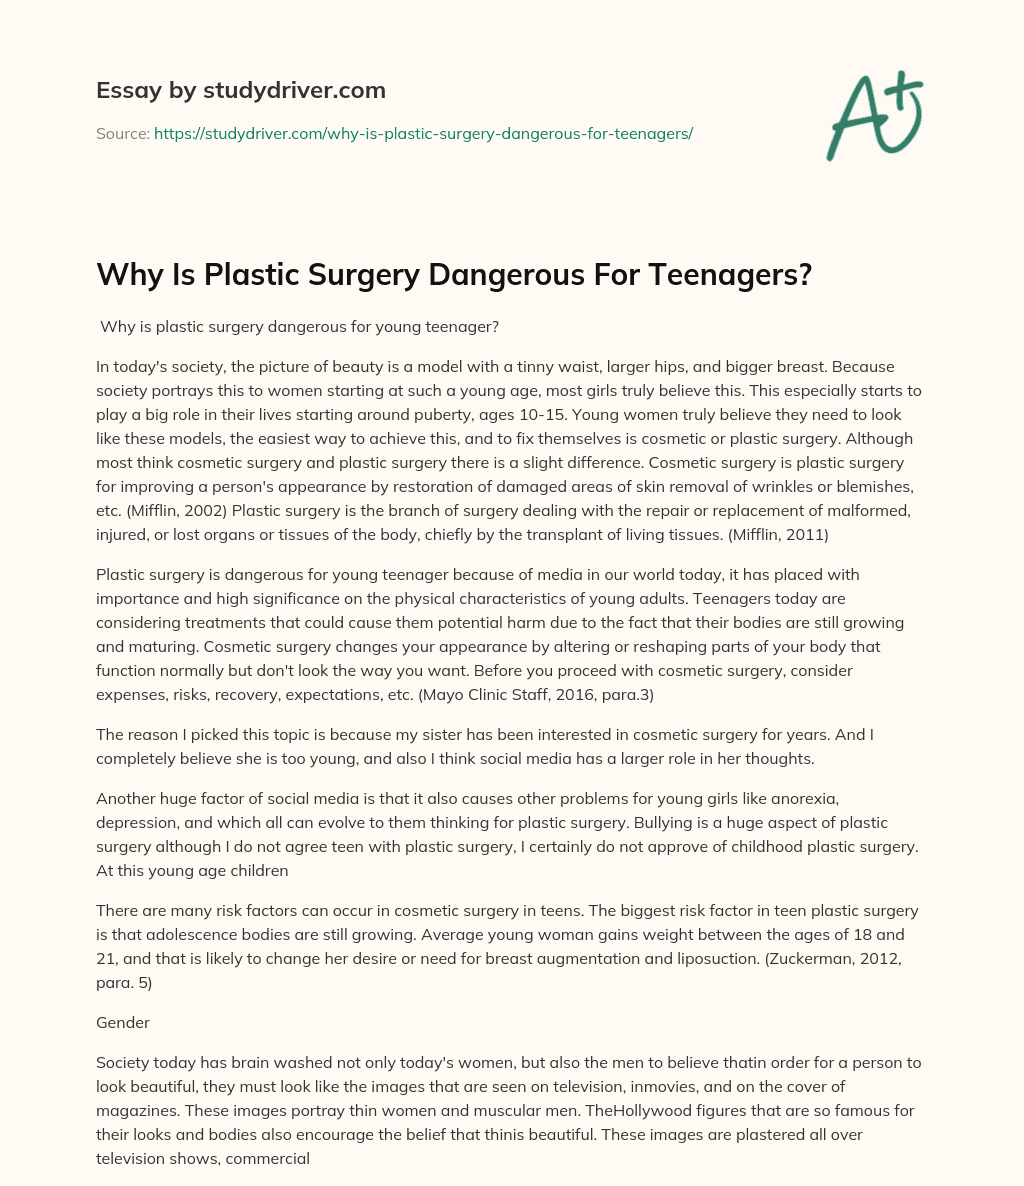 Why is Plastic Surgery Dangerous for Teenagers? essay